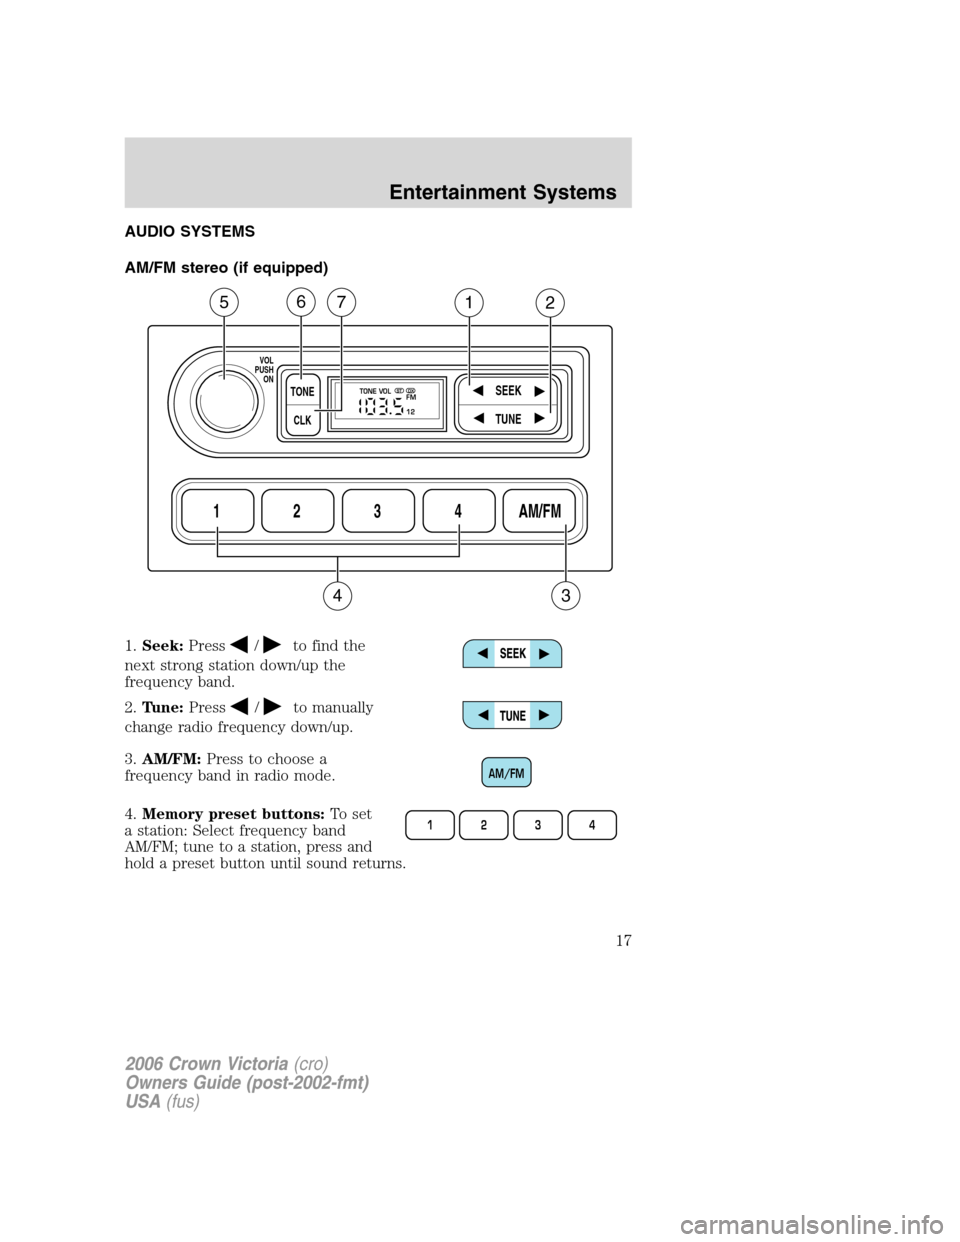 FORD CROWN VICTORIA 2006 2.G User Guide AUDIO SYSTEMS
AM/FM stereo (if equipped)
1.Seek:Press
/to find the
next strong station down/up the
frequency band.
2.Tune:Press
/to manually
change radio frequency down/up.
3.AM/FM:Press to choose a
f